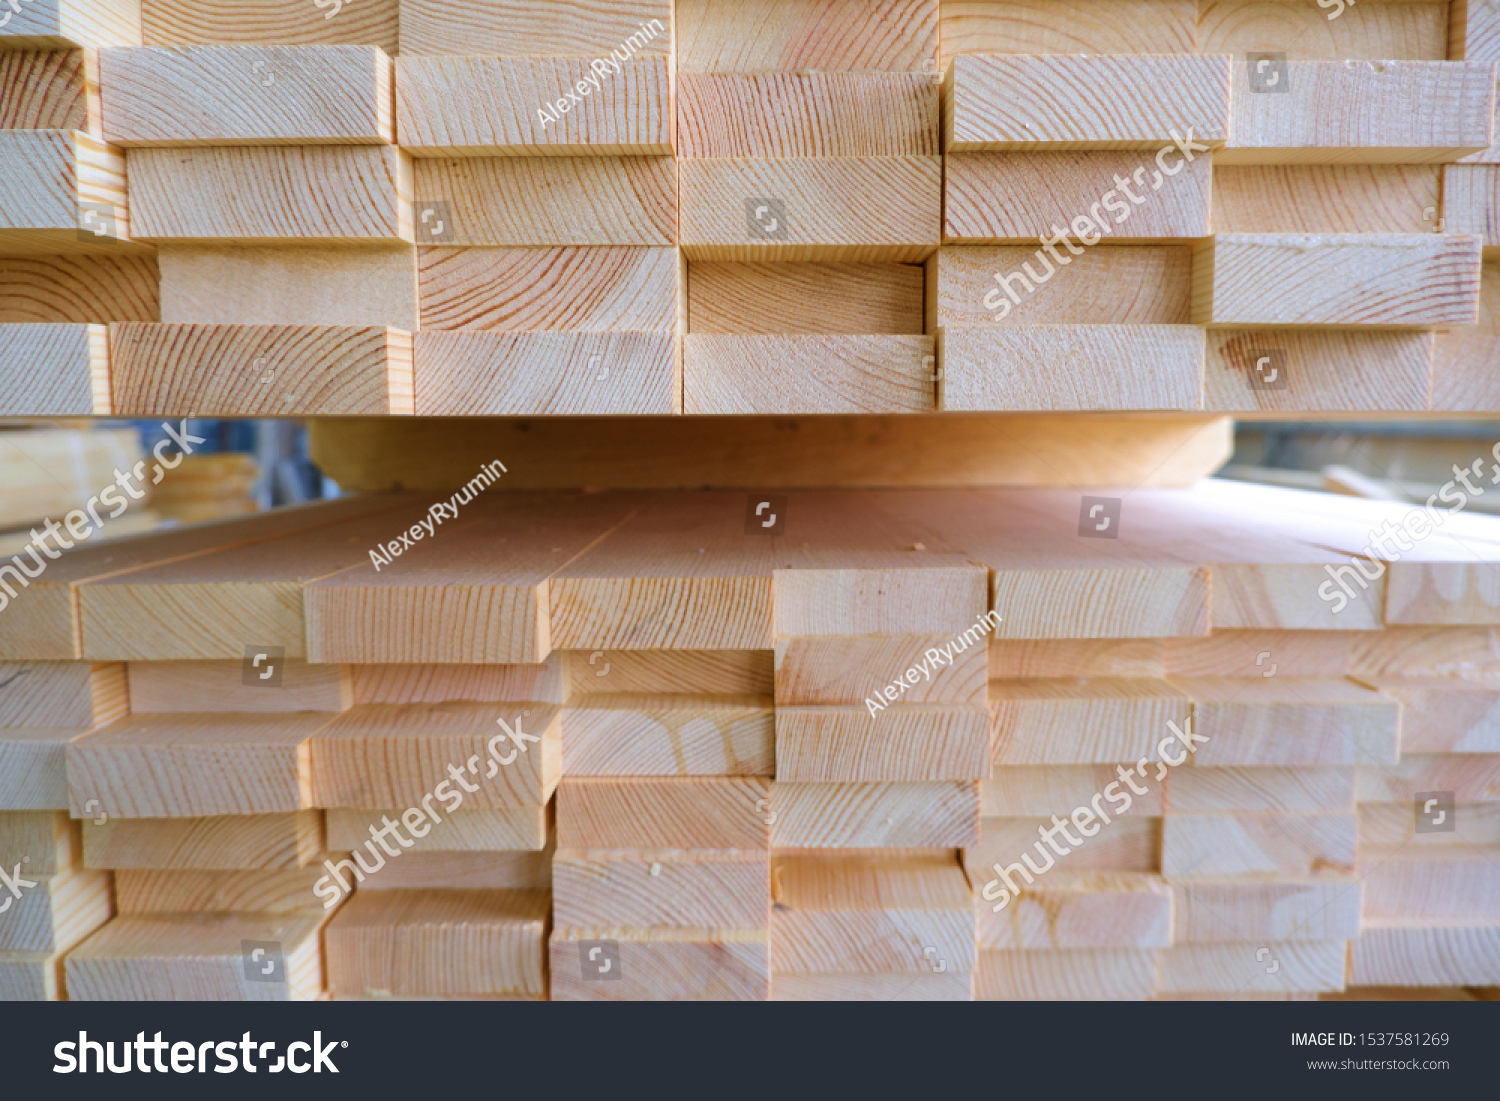 End view of stack of three-layer wooden glued laminated timber beams from pine finger joint spliced boards for wooden windows.